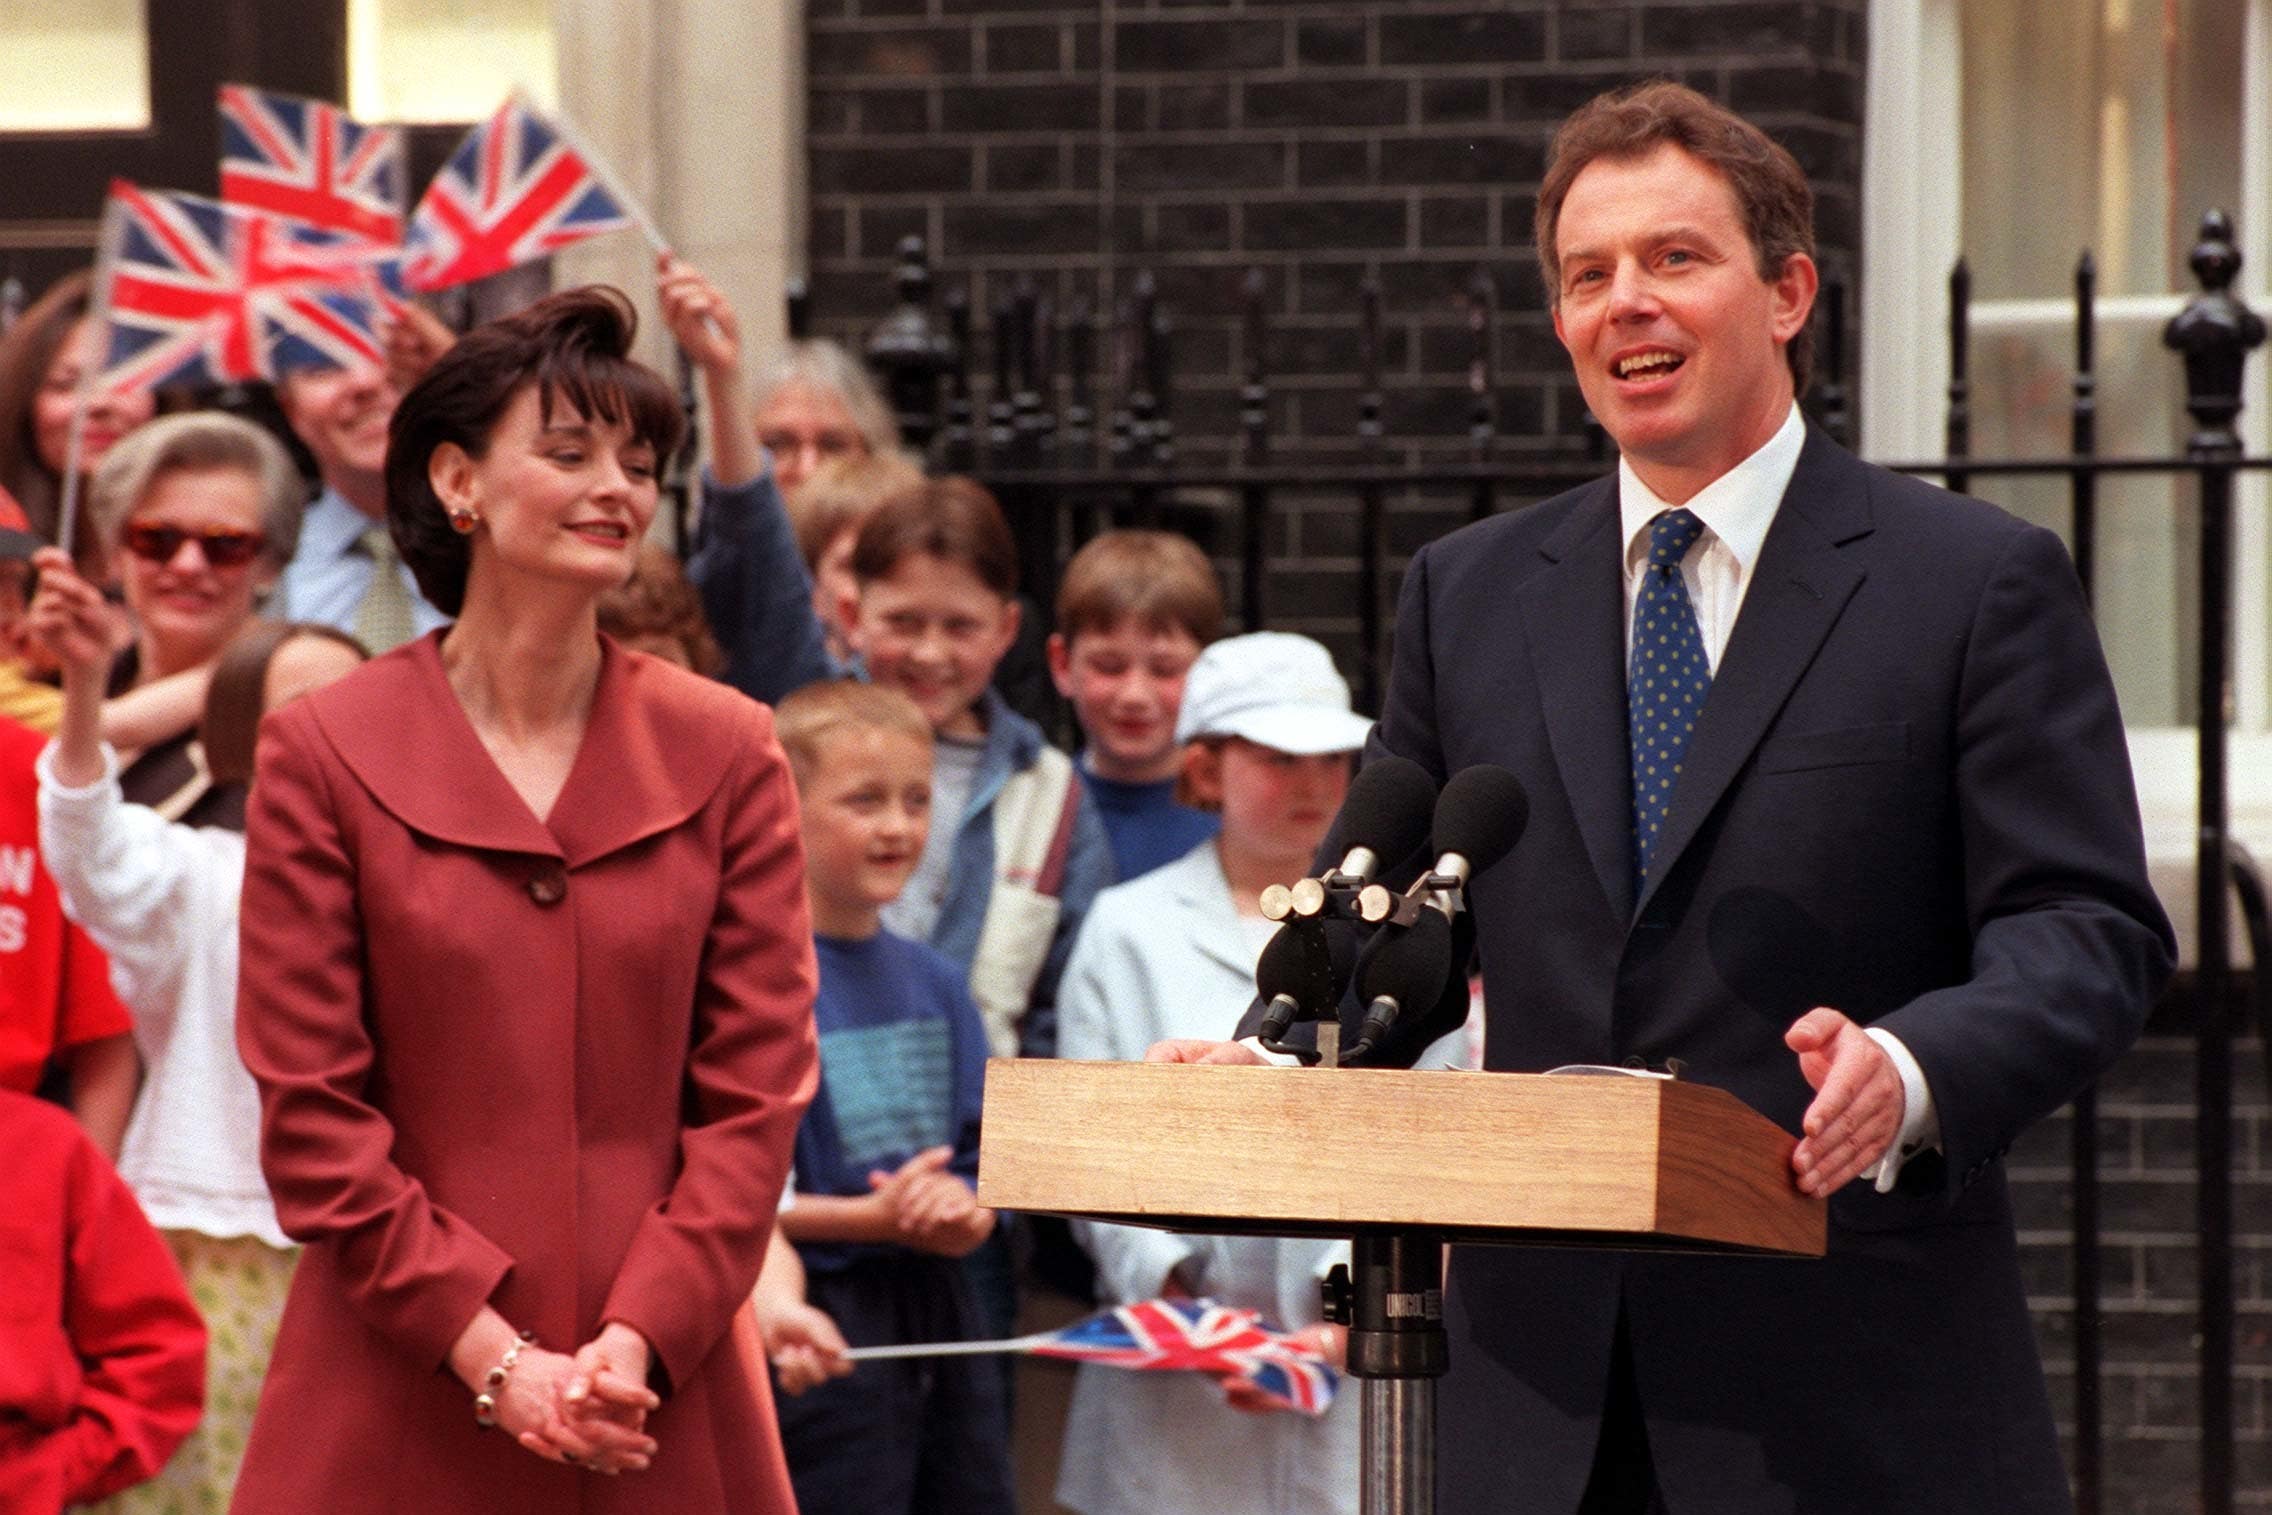 Things Can Only Get Better became the anthem of Tony Blair’s 1997 election campaign